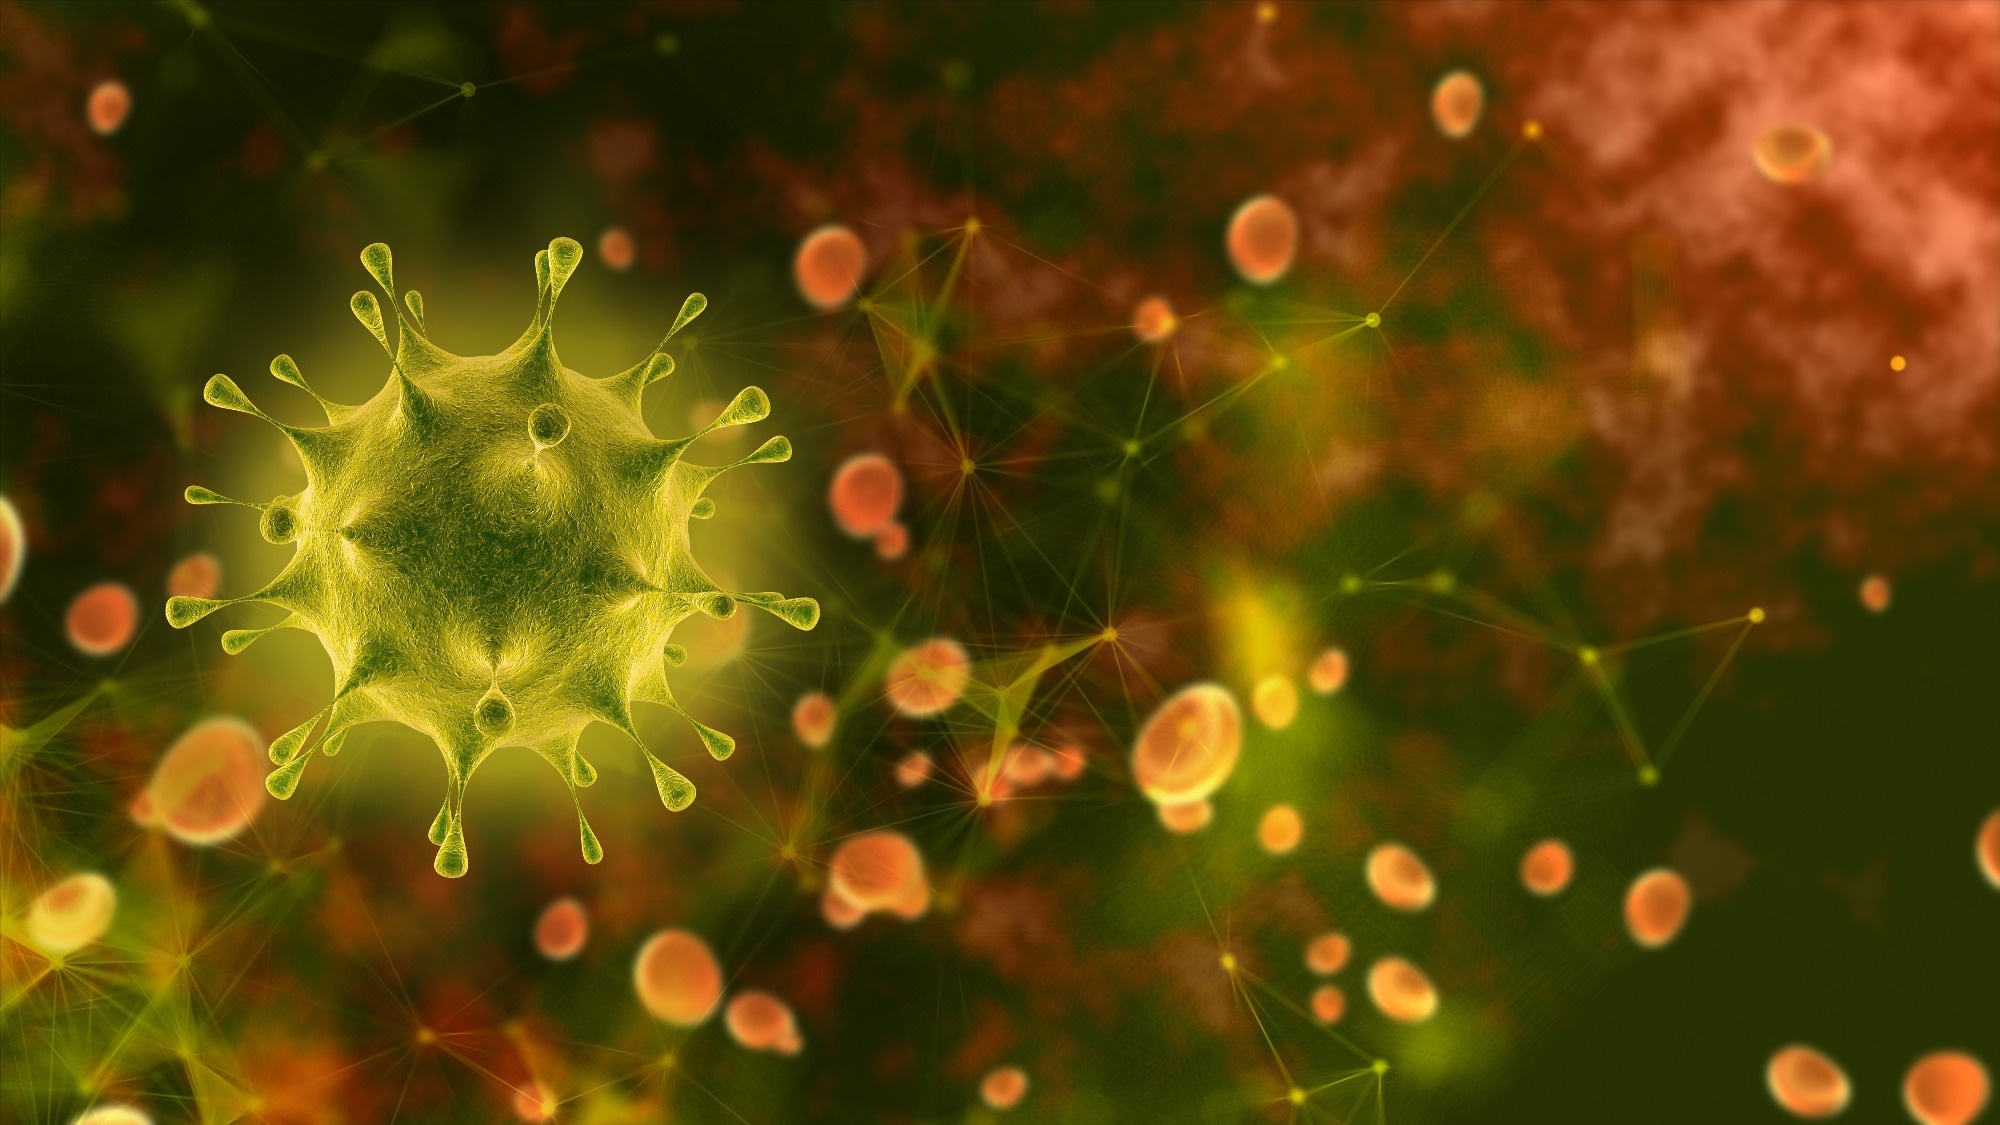 Study: Mosaic RBD nanoparticles induce intergenus cross-reactive antibodies and protect against SARS-CoV-2 challenge. Image Credit: thinkhubstudio / Shutterstock